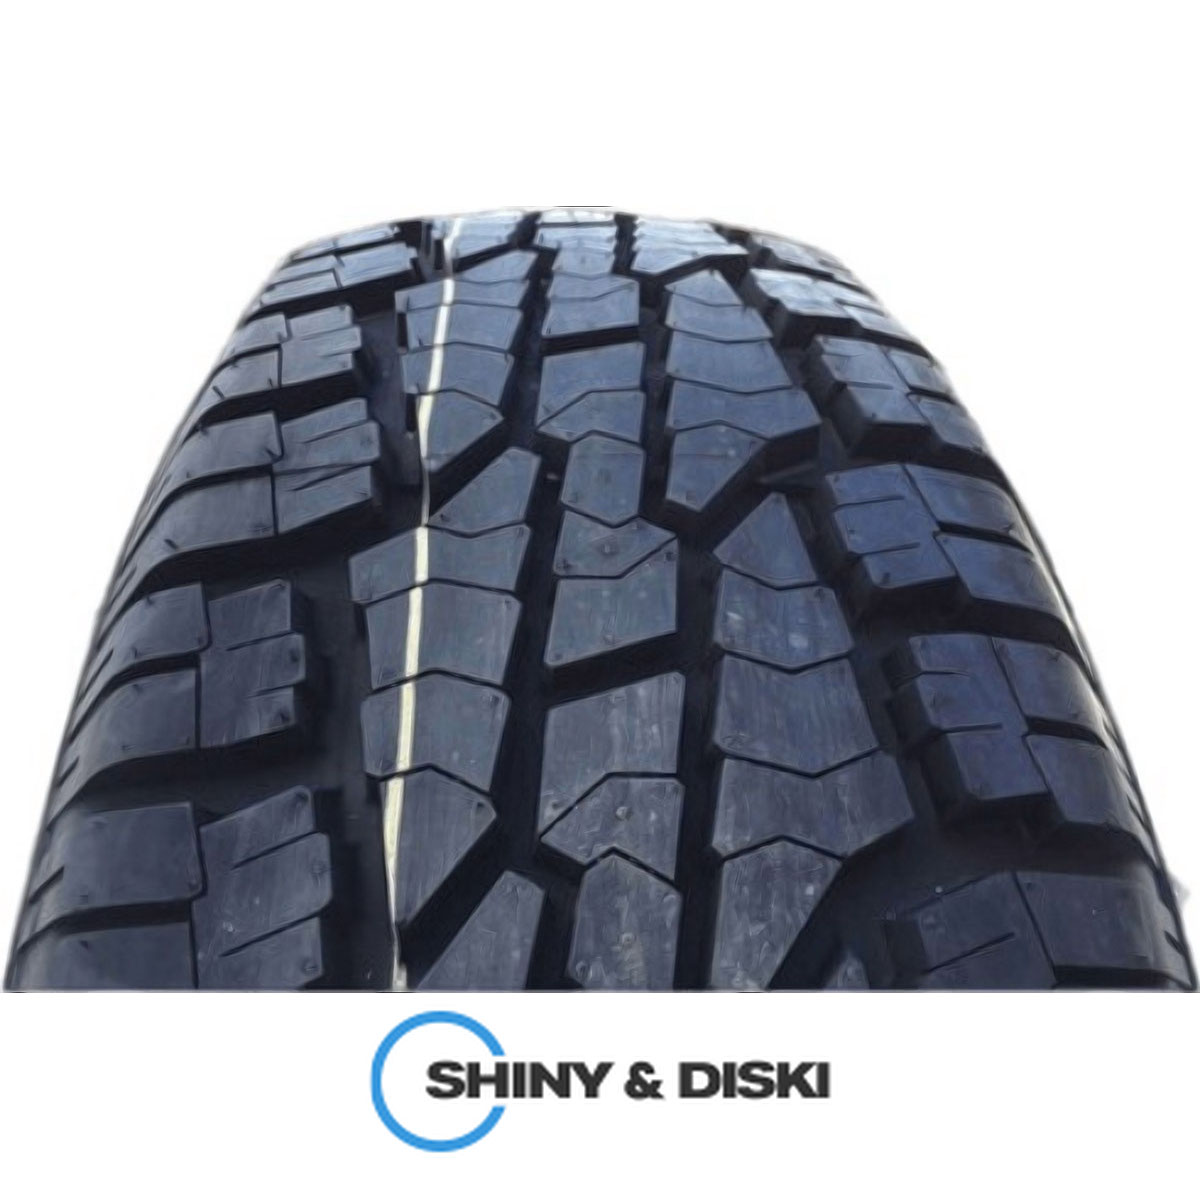 гума cachland ch-at7001 235/85 r16 120/116r